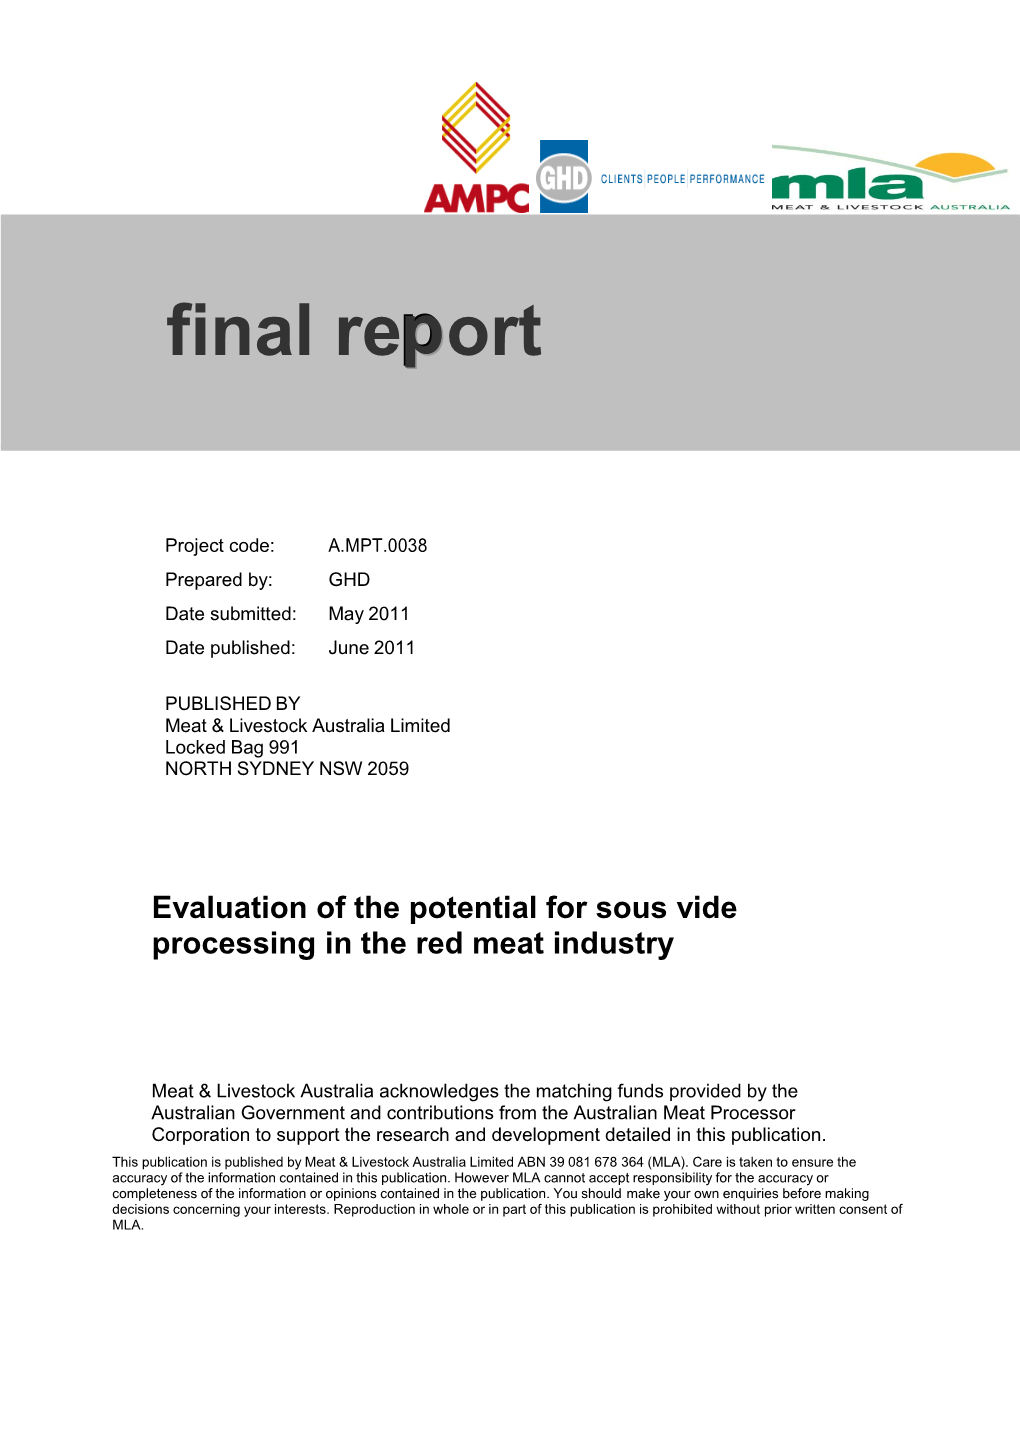 Evaluation of the Potential for Sous Vide Processing in the Red Meat Industry